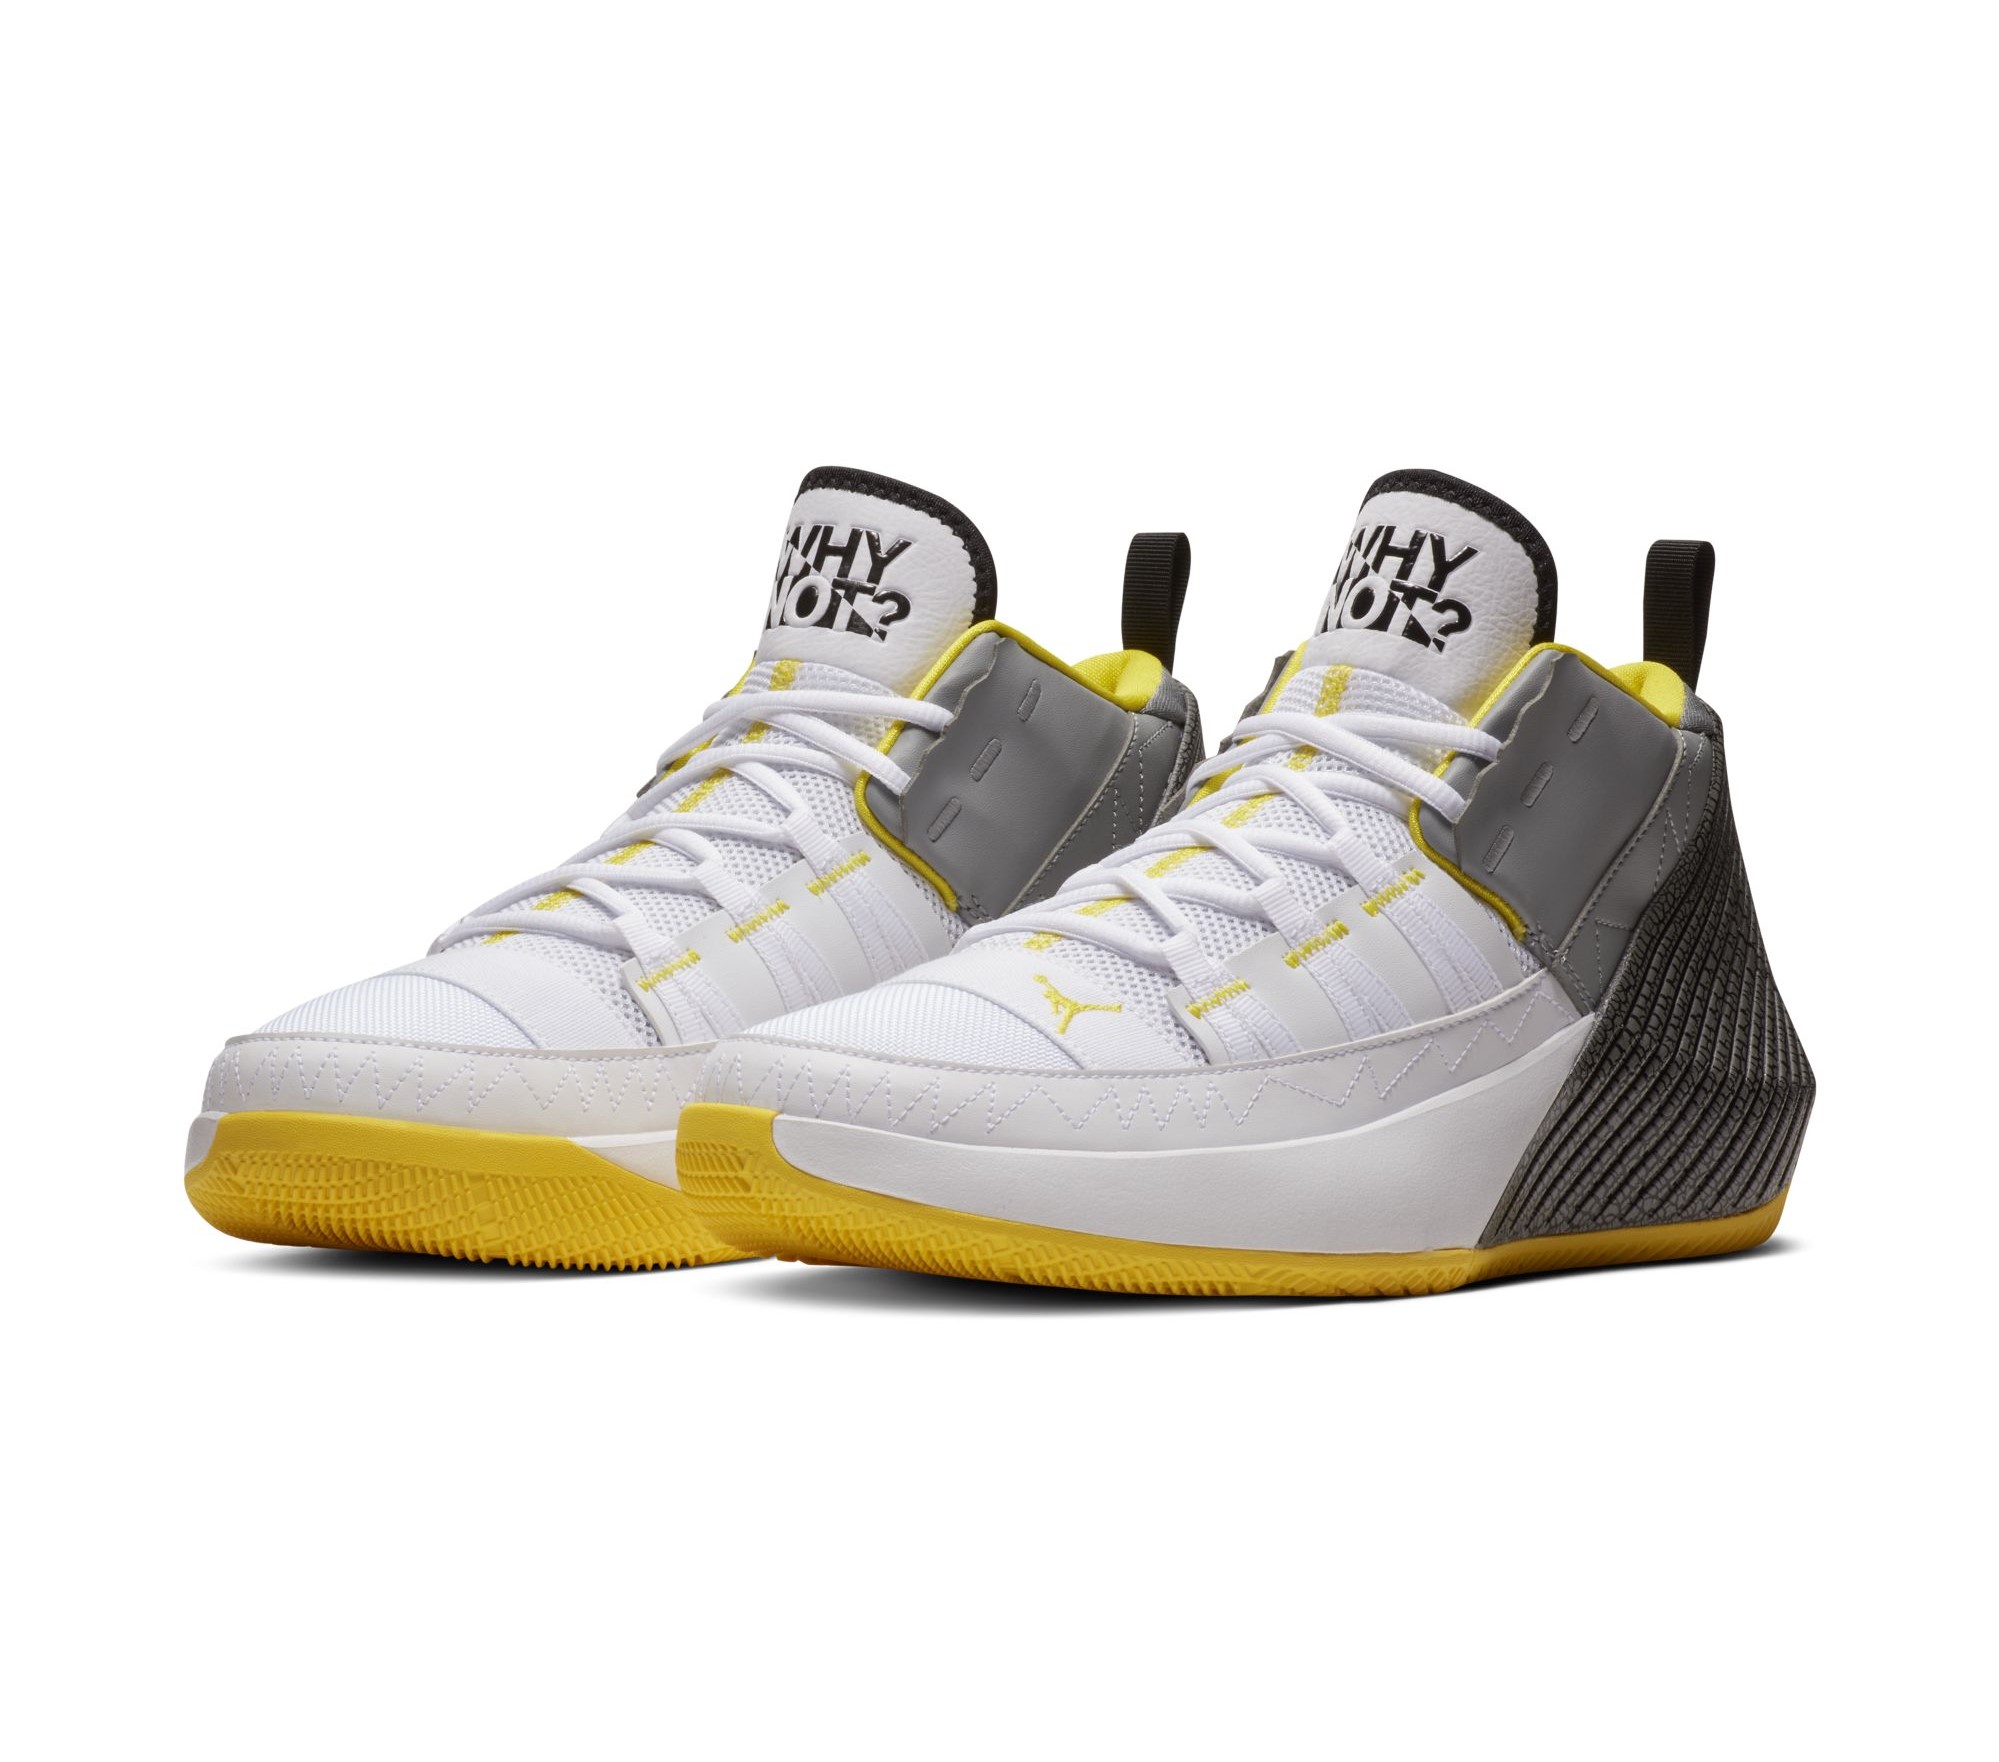 russell westbrook why not zer0.1 chaos yellow